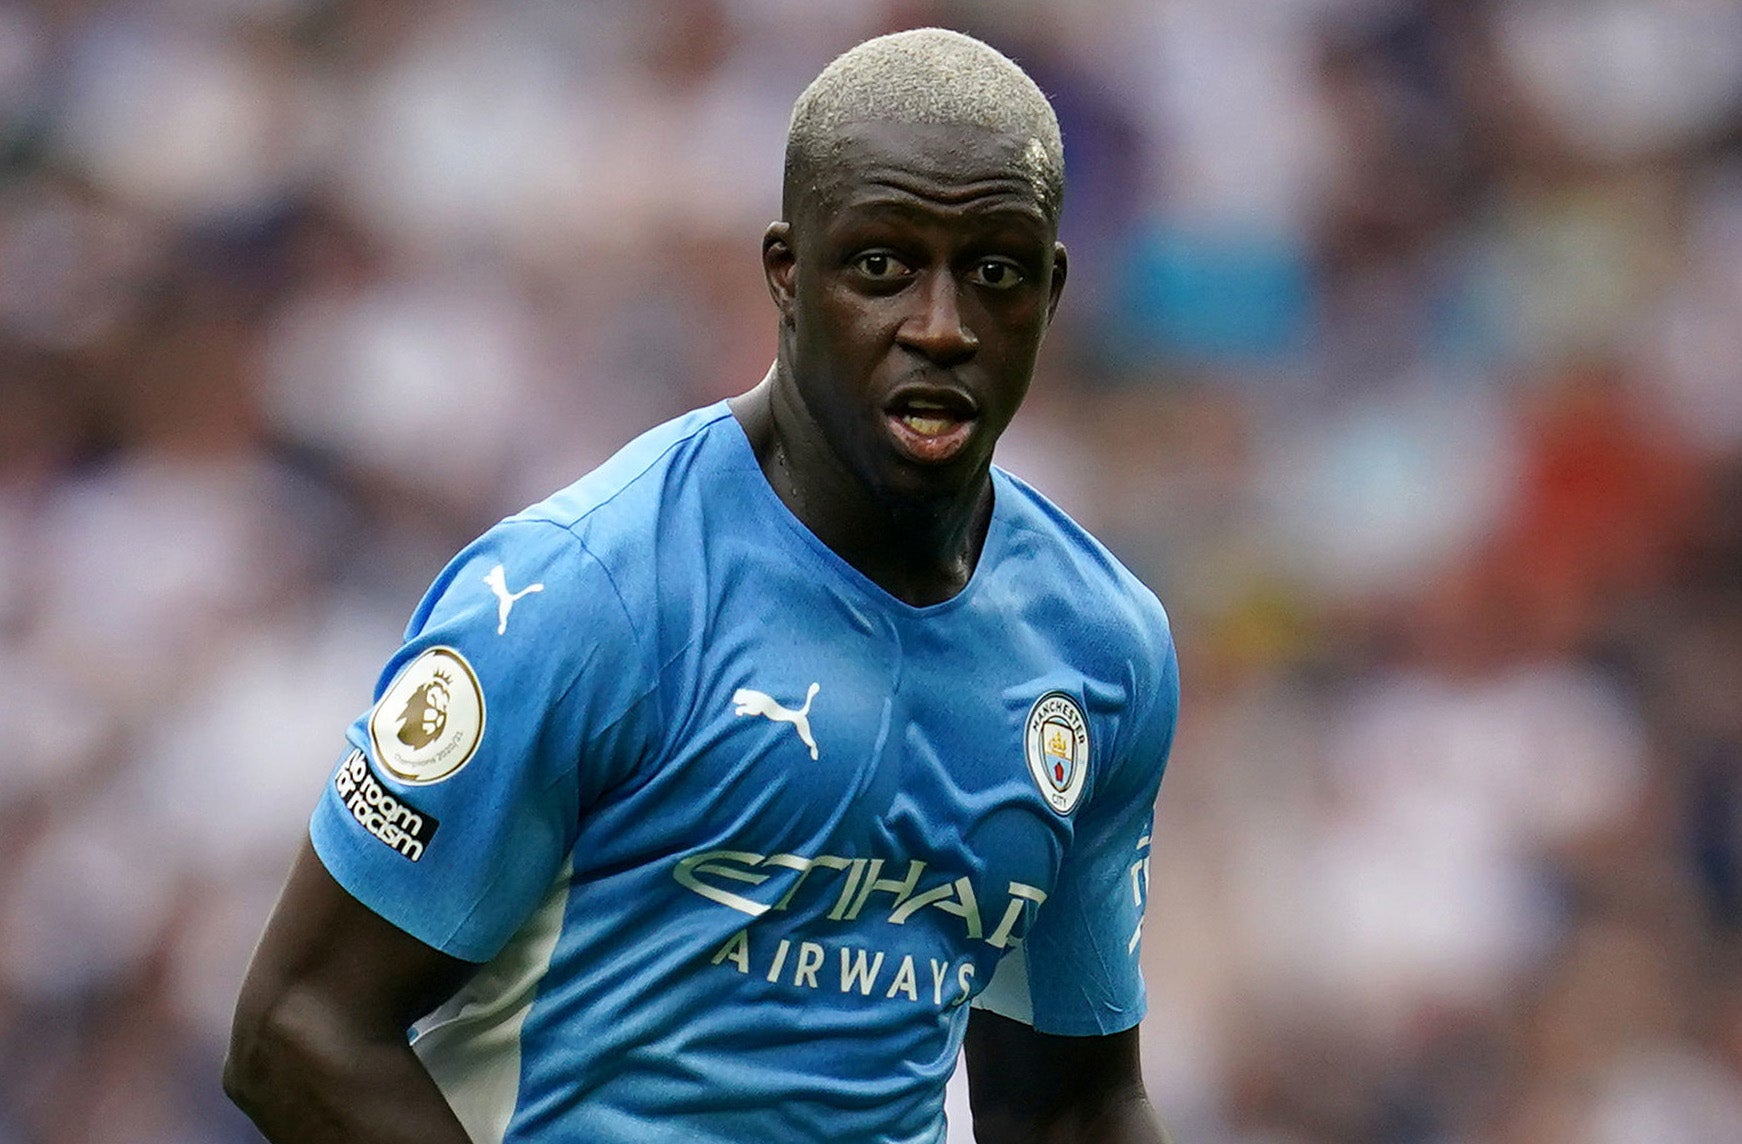 Mendy was suspended by Man City after being charged with rape